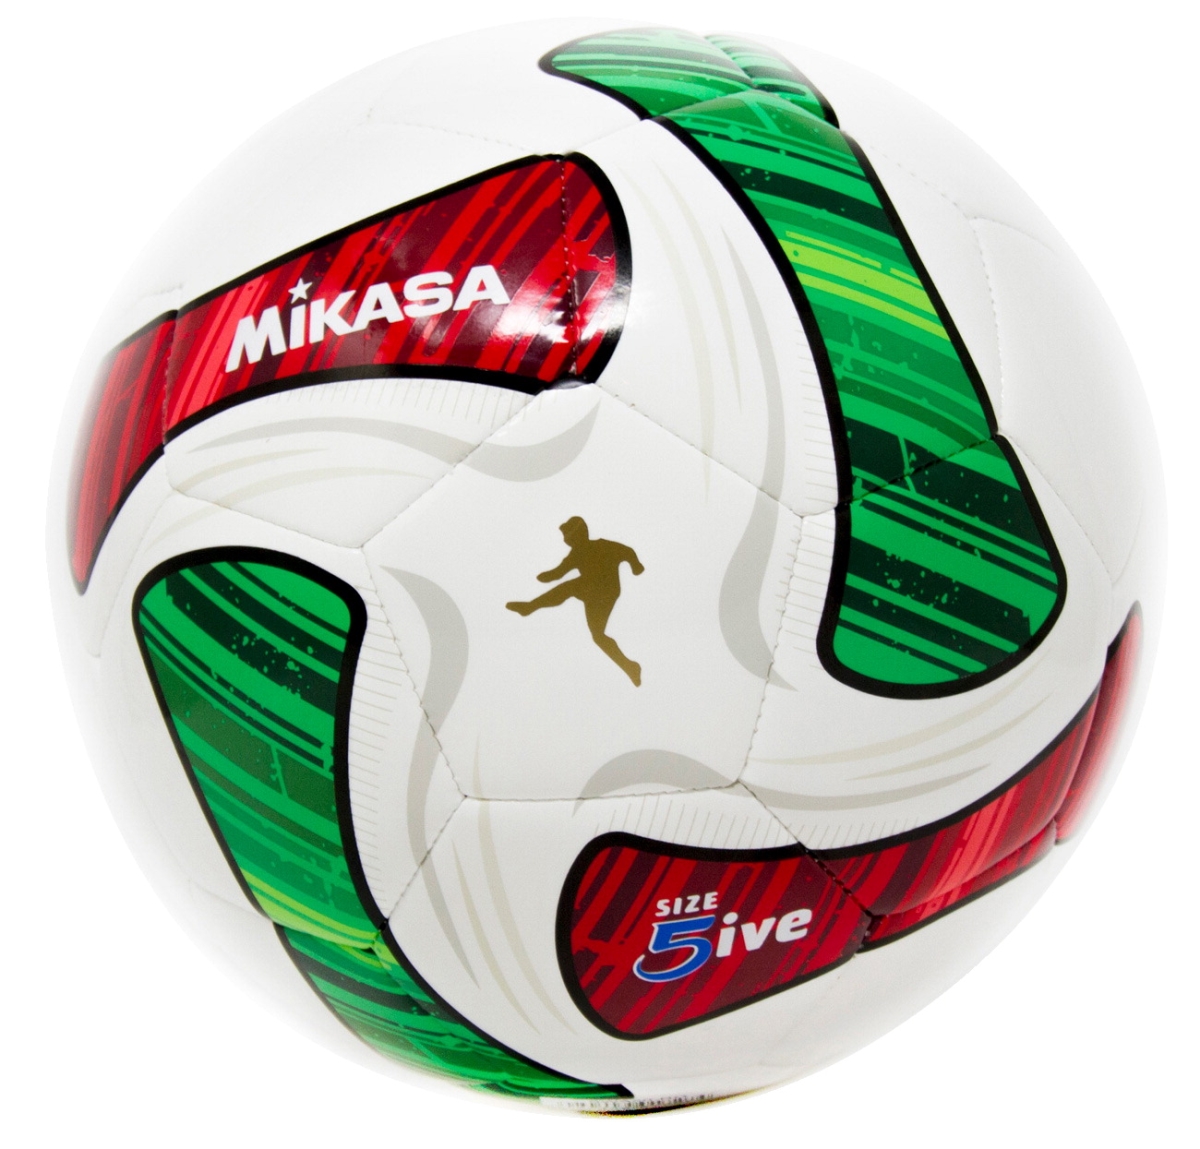 2003093 Swa Series Soccer Ball, White, Red & Green - Size 5